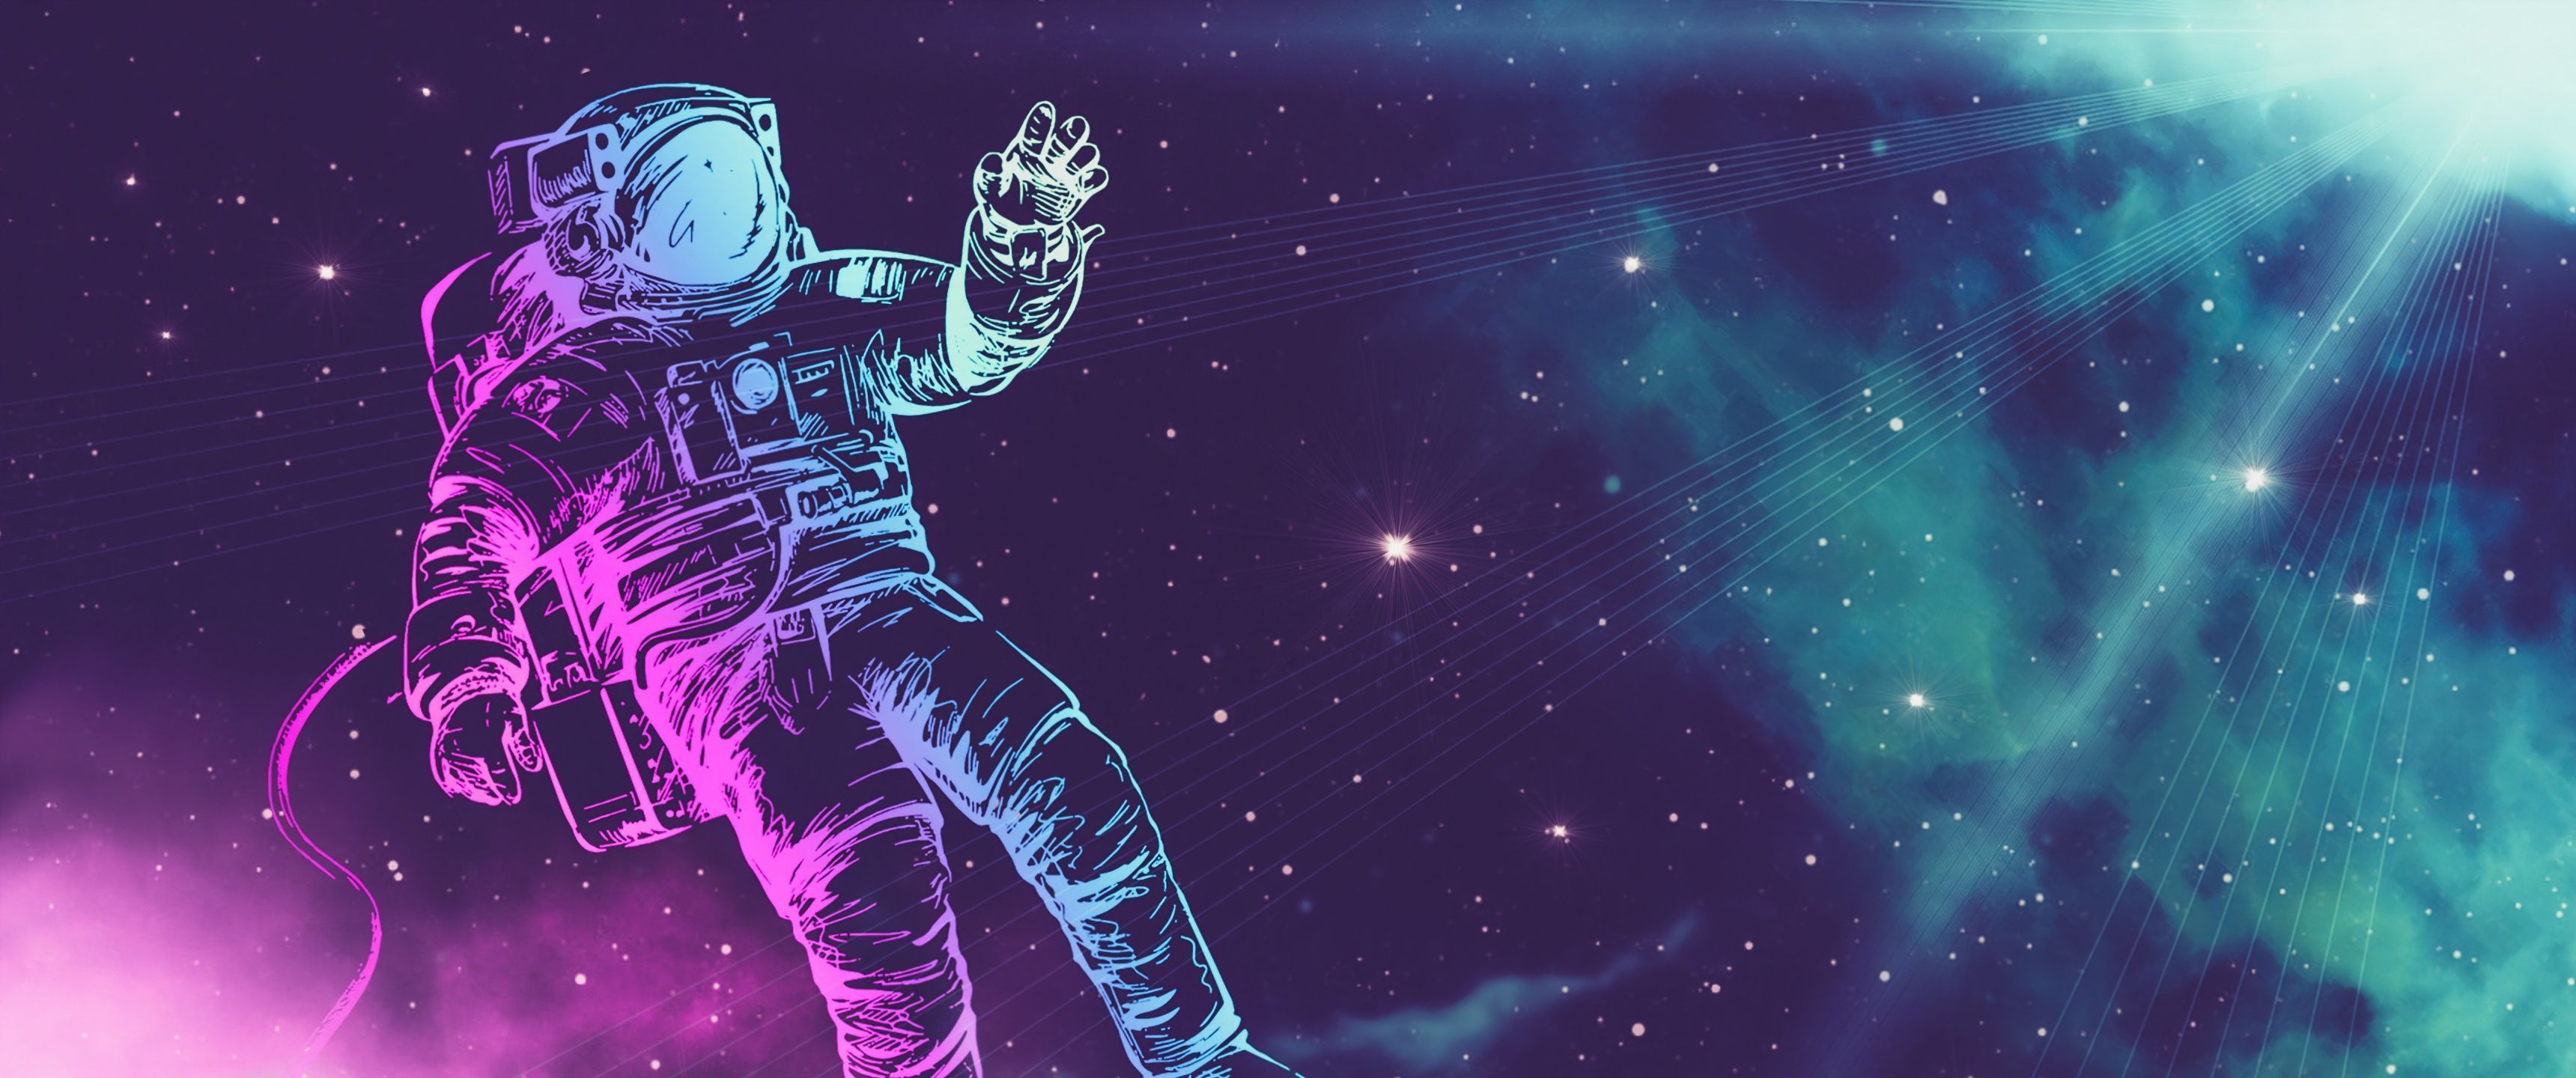 An astronaut is flying through space with a star in the background - 3440x1440